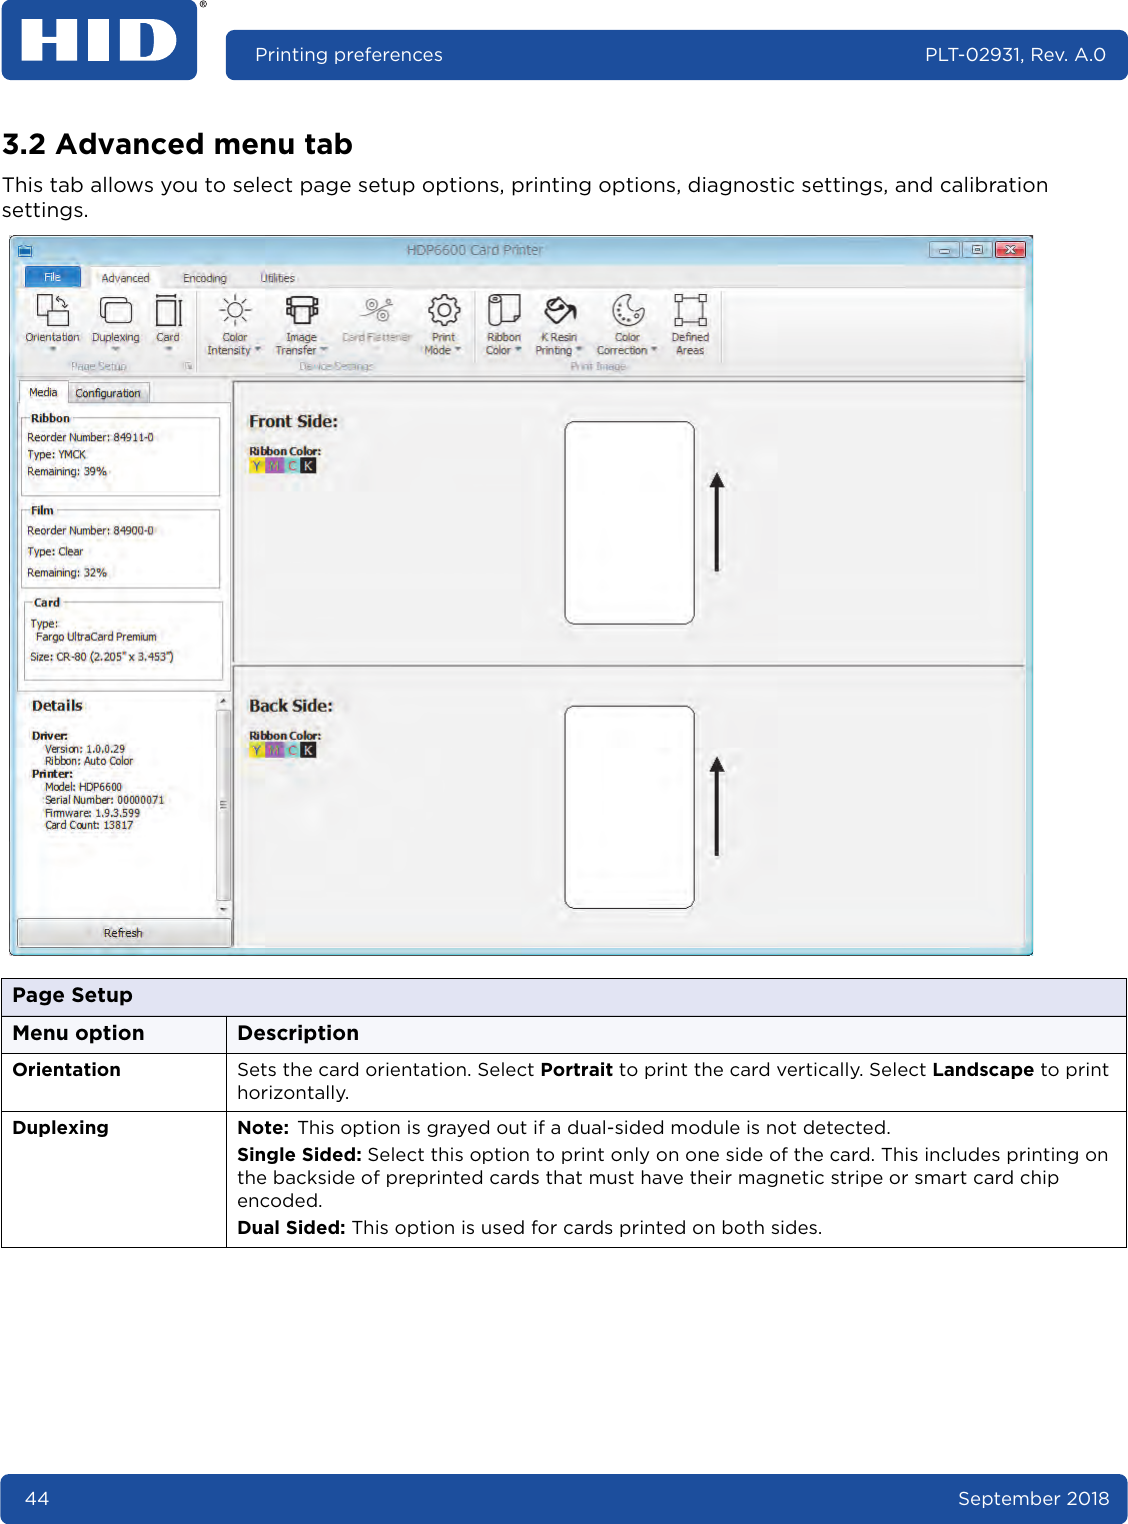 44 September 2018Printing preferences PLT-02931, Rev. A.03.2 Advanced menu tabThis tab allows you to select page setup options, printing options, diagnostic settings, and calibration settings.  Page SetupMenu option DescriptionOrientation Sets the card orientation. Select Portrait to print the card vertically. Select Landscape to print horizontally.Duplexing Note: This option is grayed out if a dual-sided module is not detected.Single Sided: Select this option to print only on one side of the card. This includes printing on the backside of preprinted cards that must have their magnetic stripe or smart card chip encoded.Dual Sided: This option is used for cards printed on both sides. 